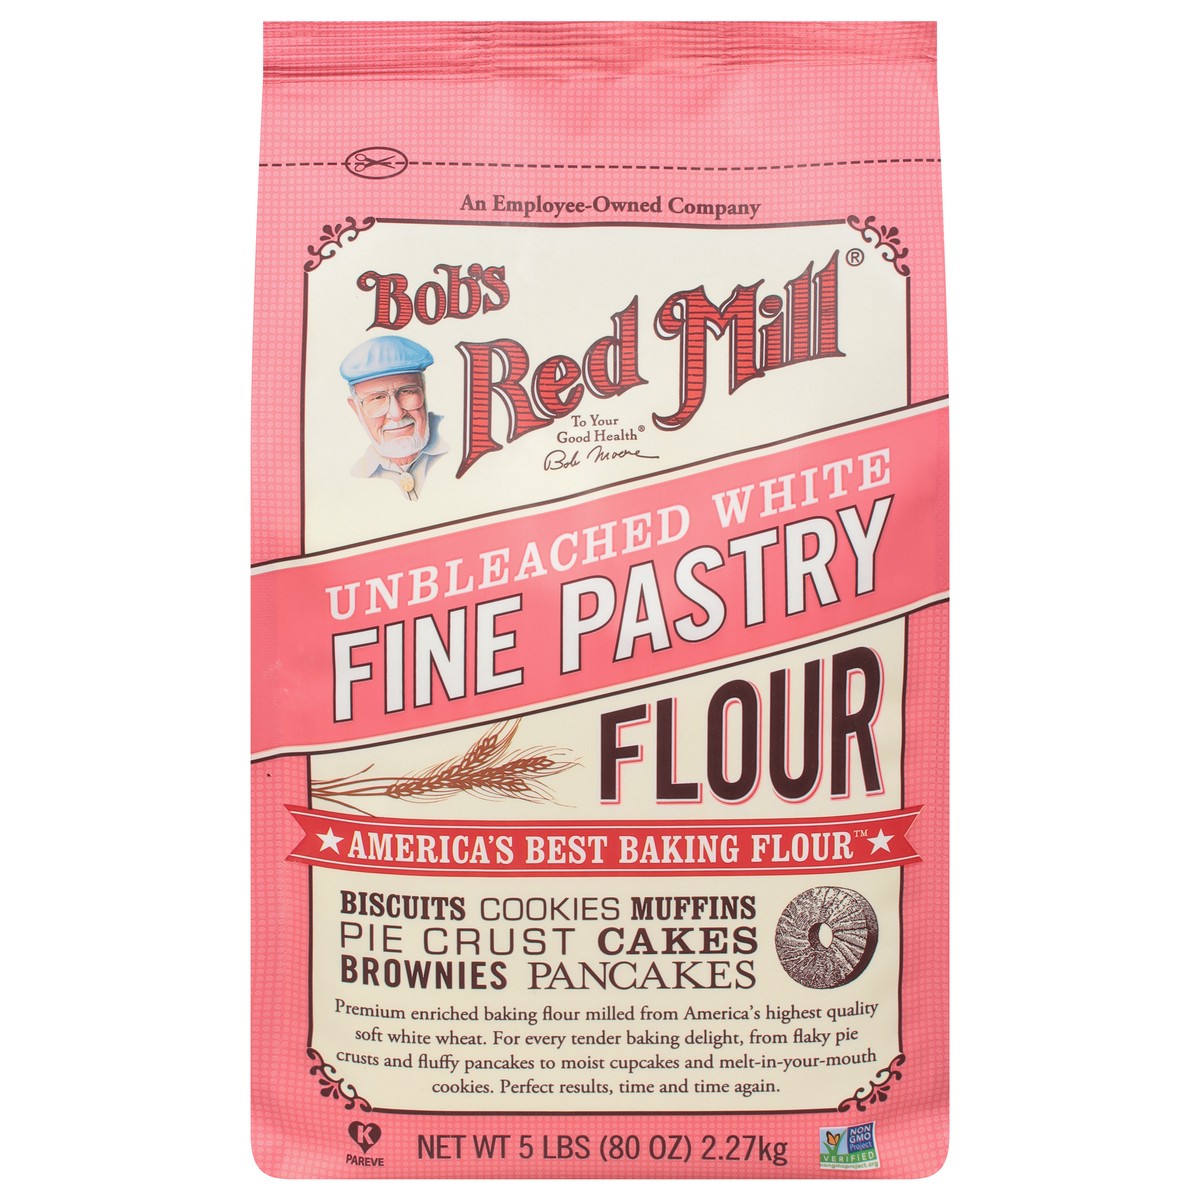 slide 1 of 9, Bobs Bob's Red Mill Unbleached White Pastry Flour, 5 lb